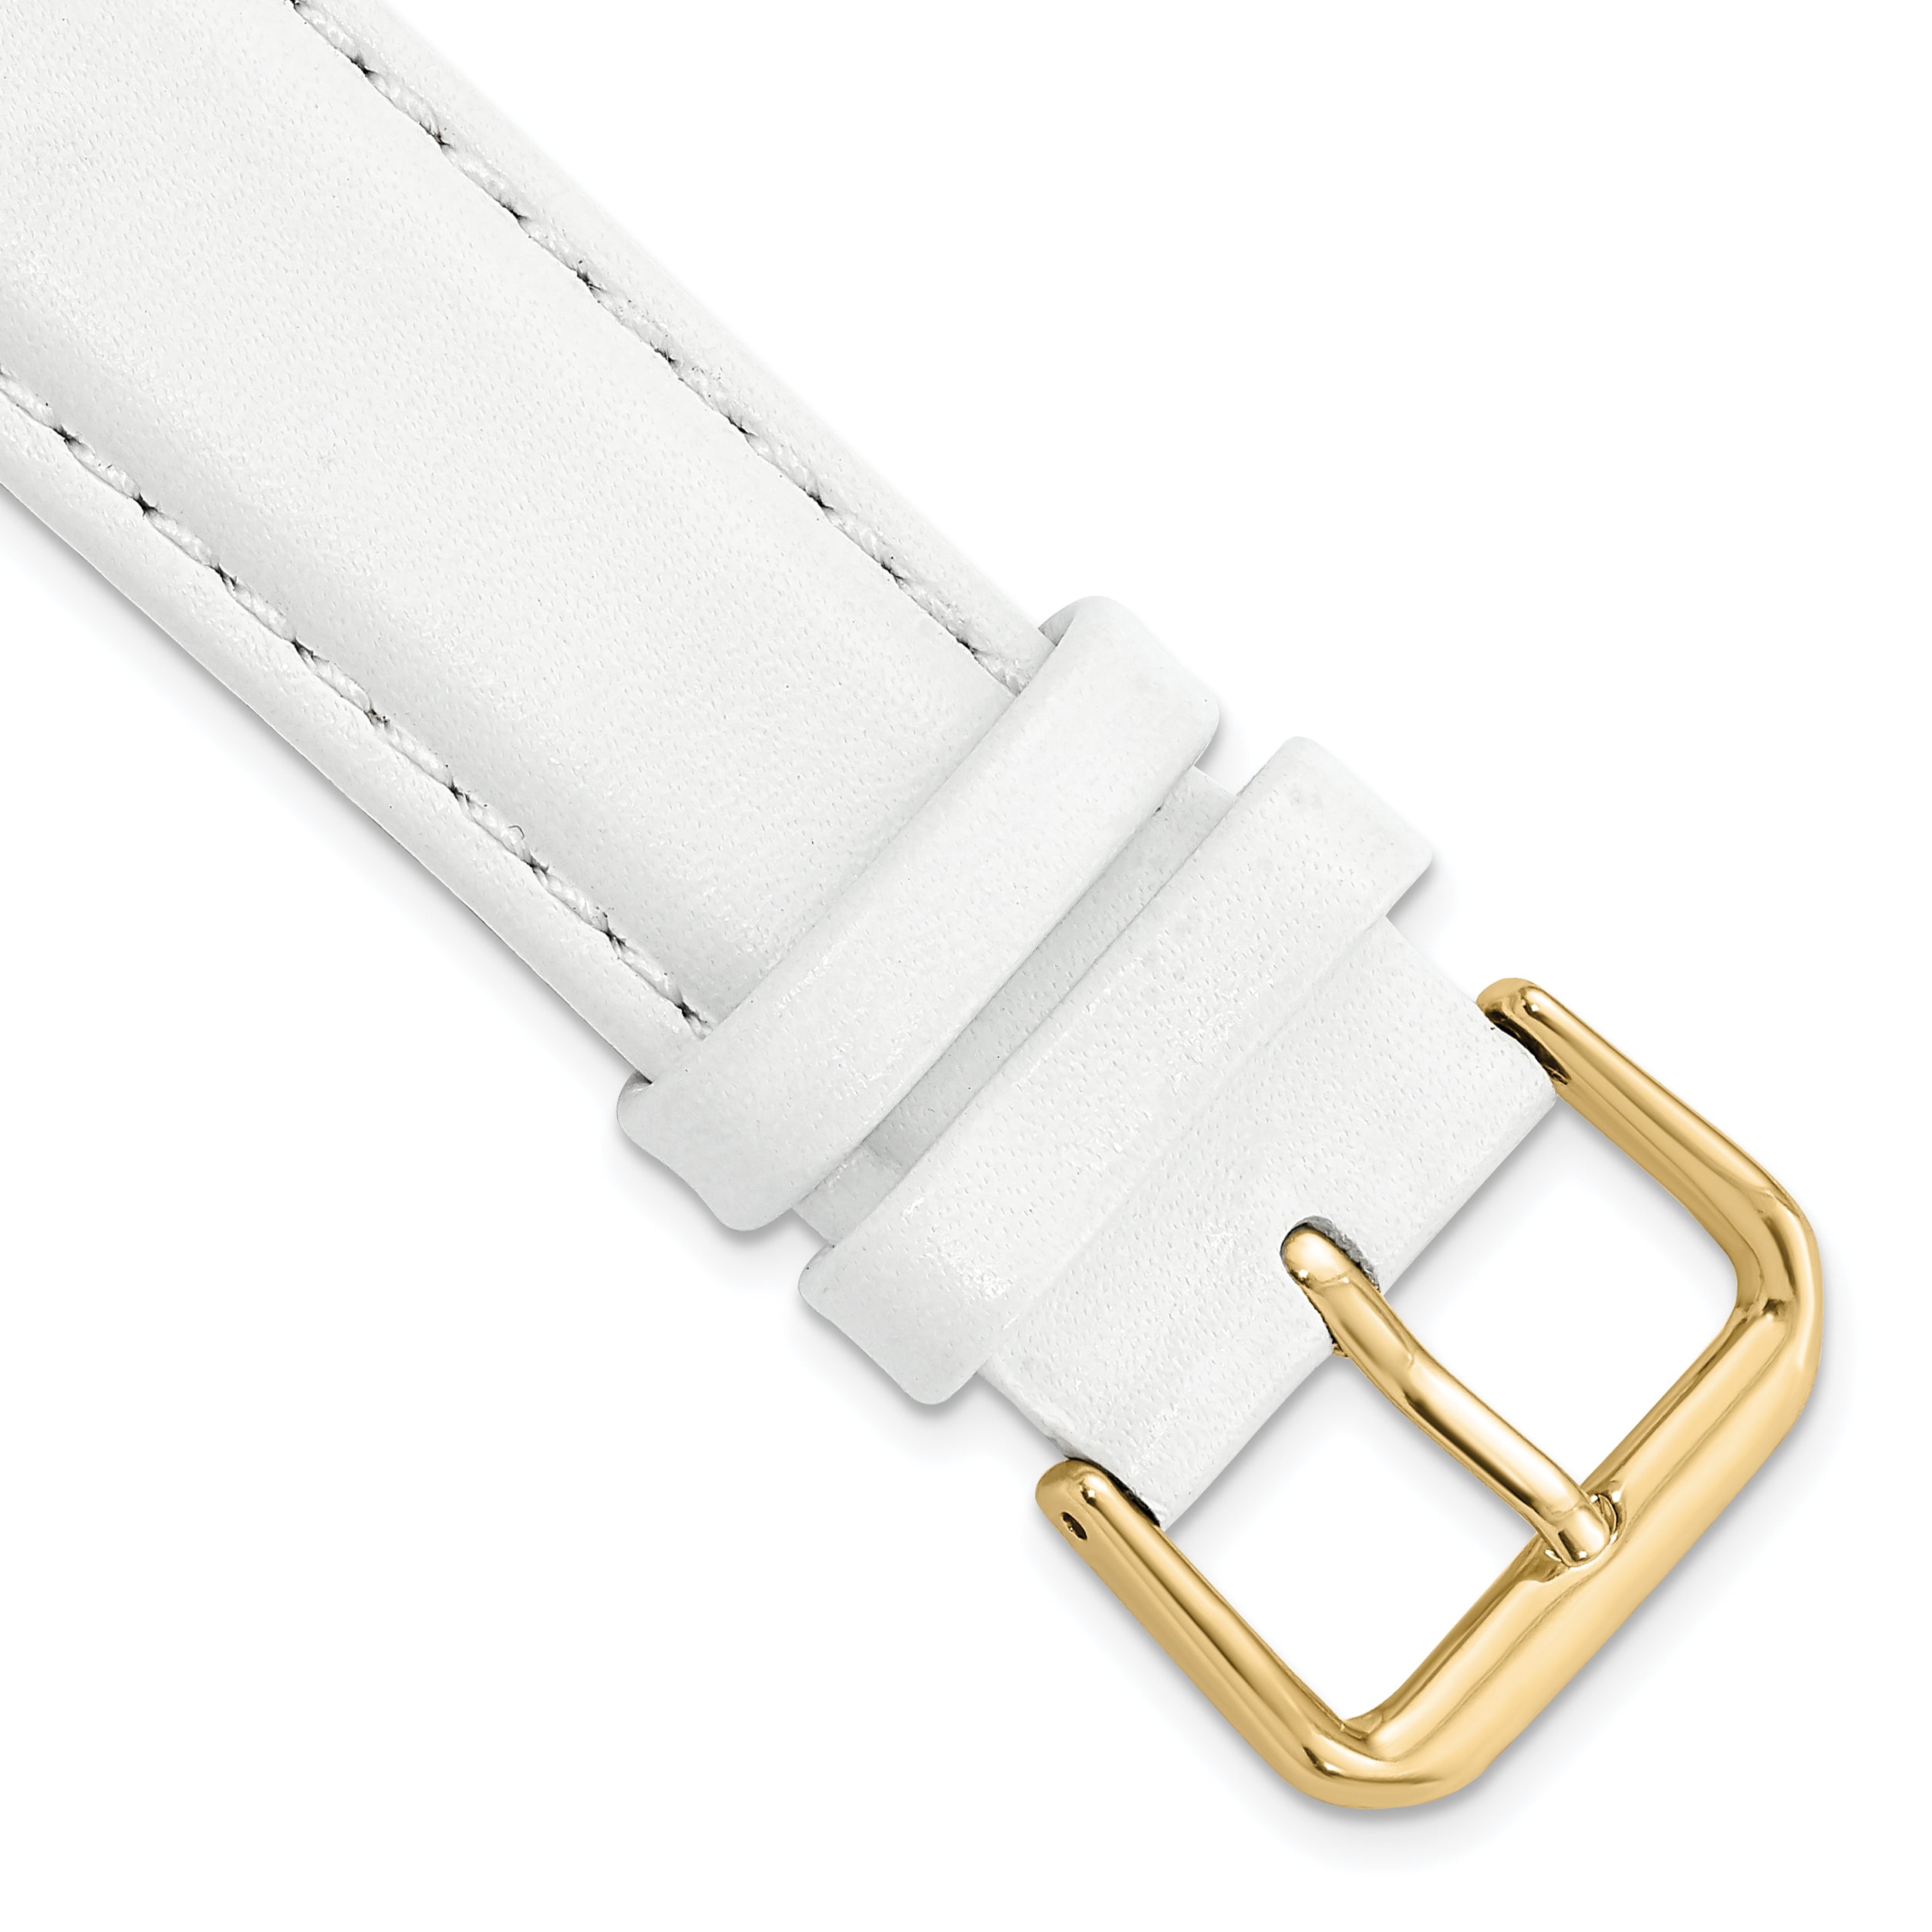 DeBeer 19mm White Smooth Leather with Gold-tone Buckle 7.5 inch Watch Band